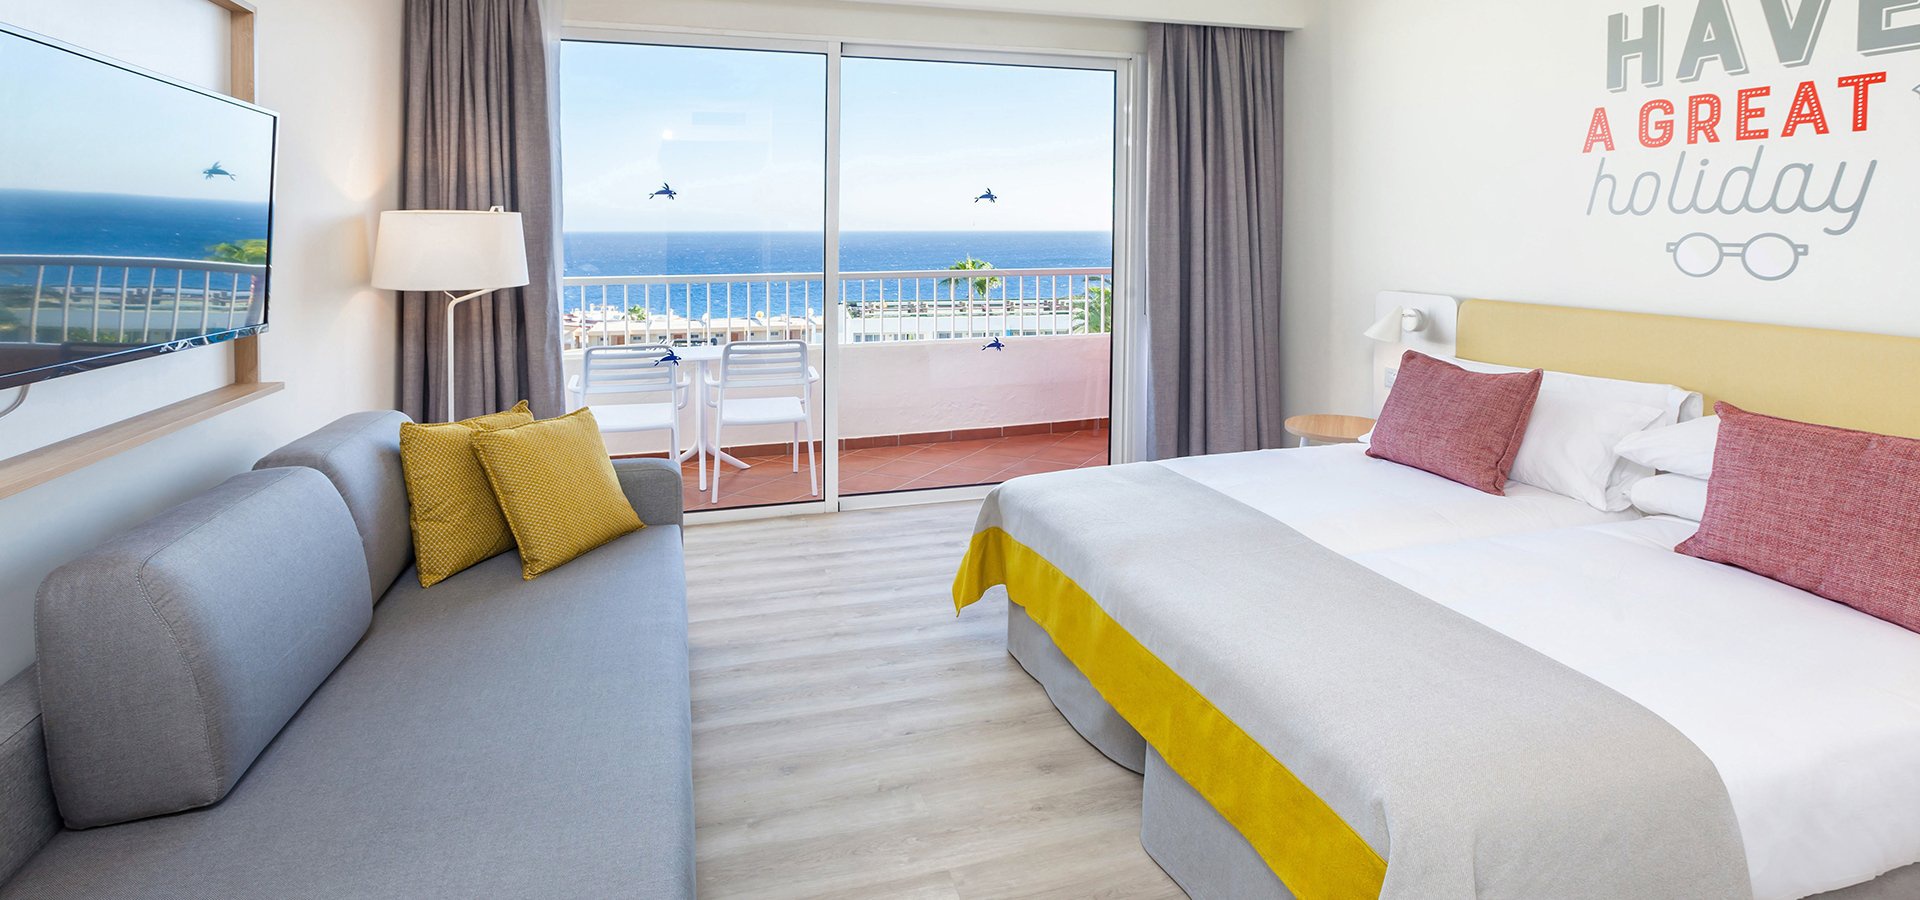 Abora Interclub Atlantic by Lopesan Hotels in Gran Canaria | Official Website